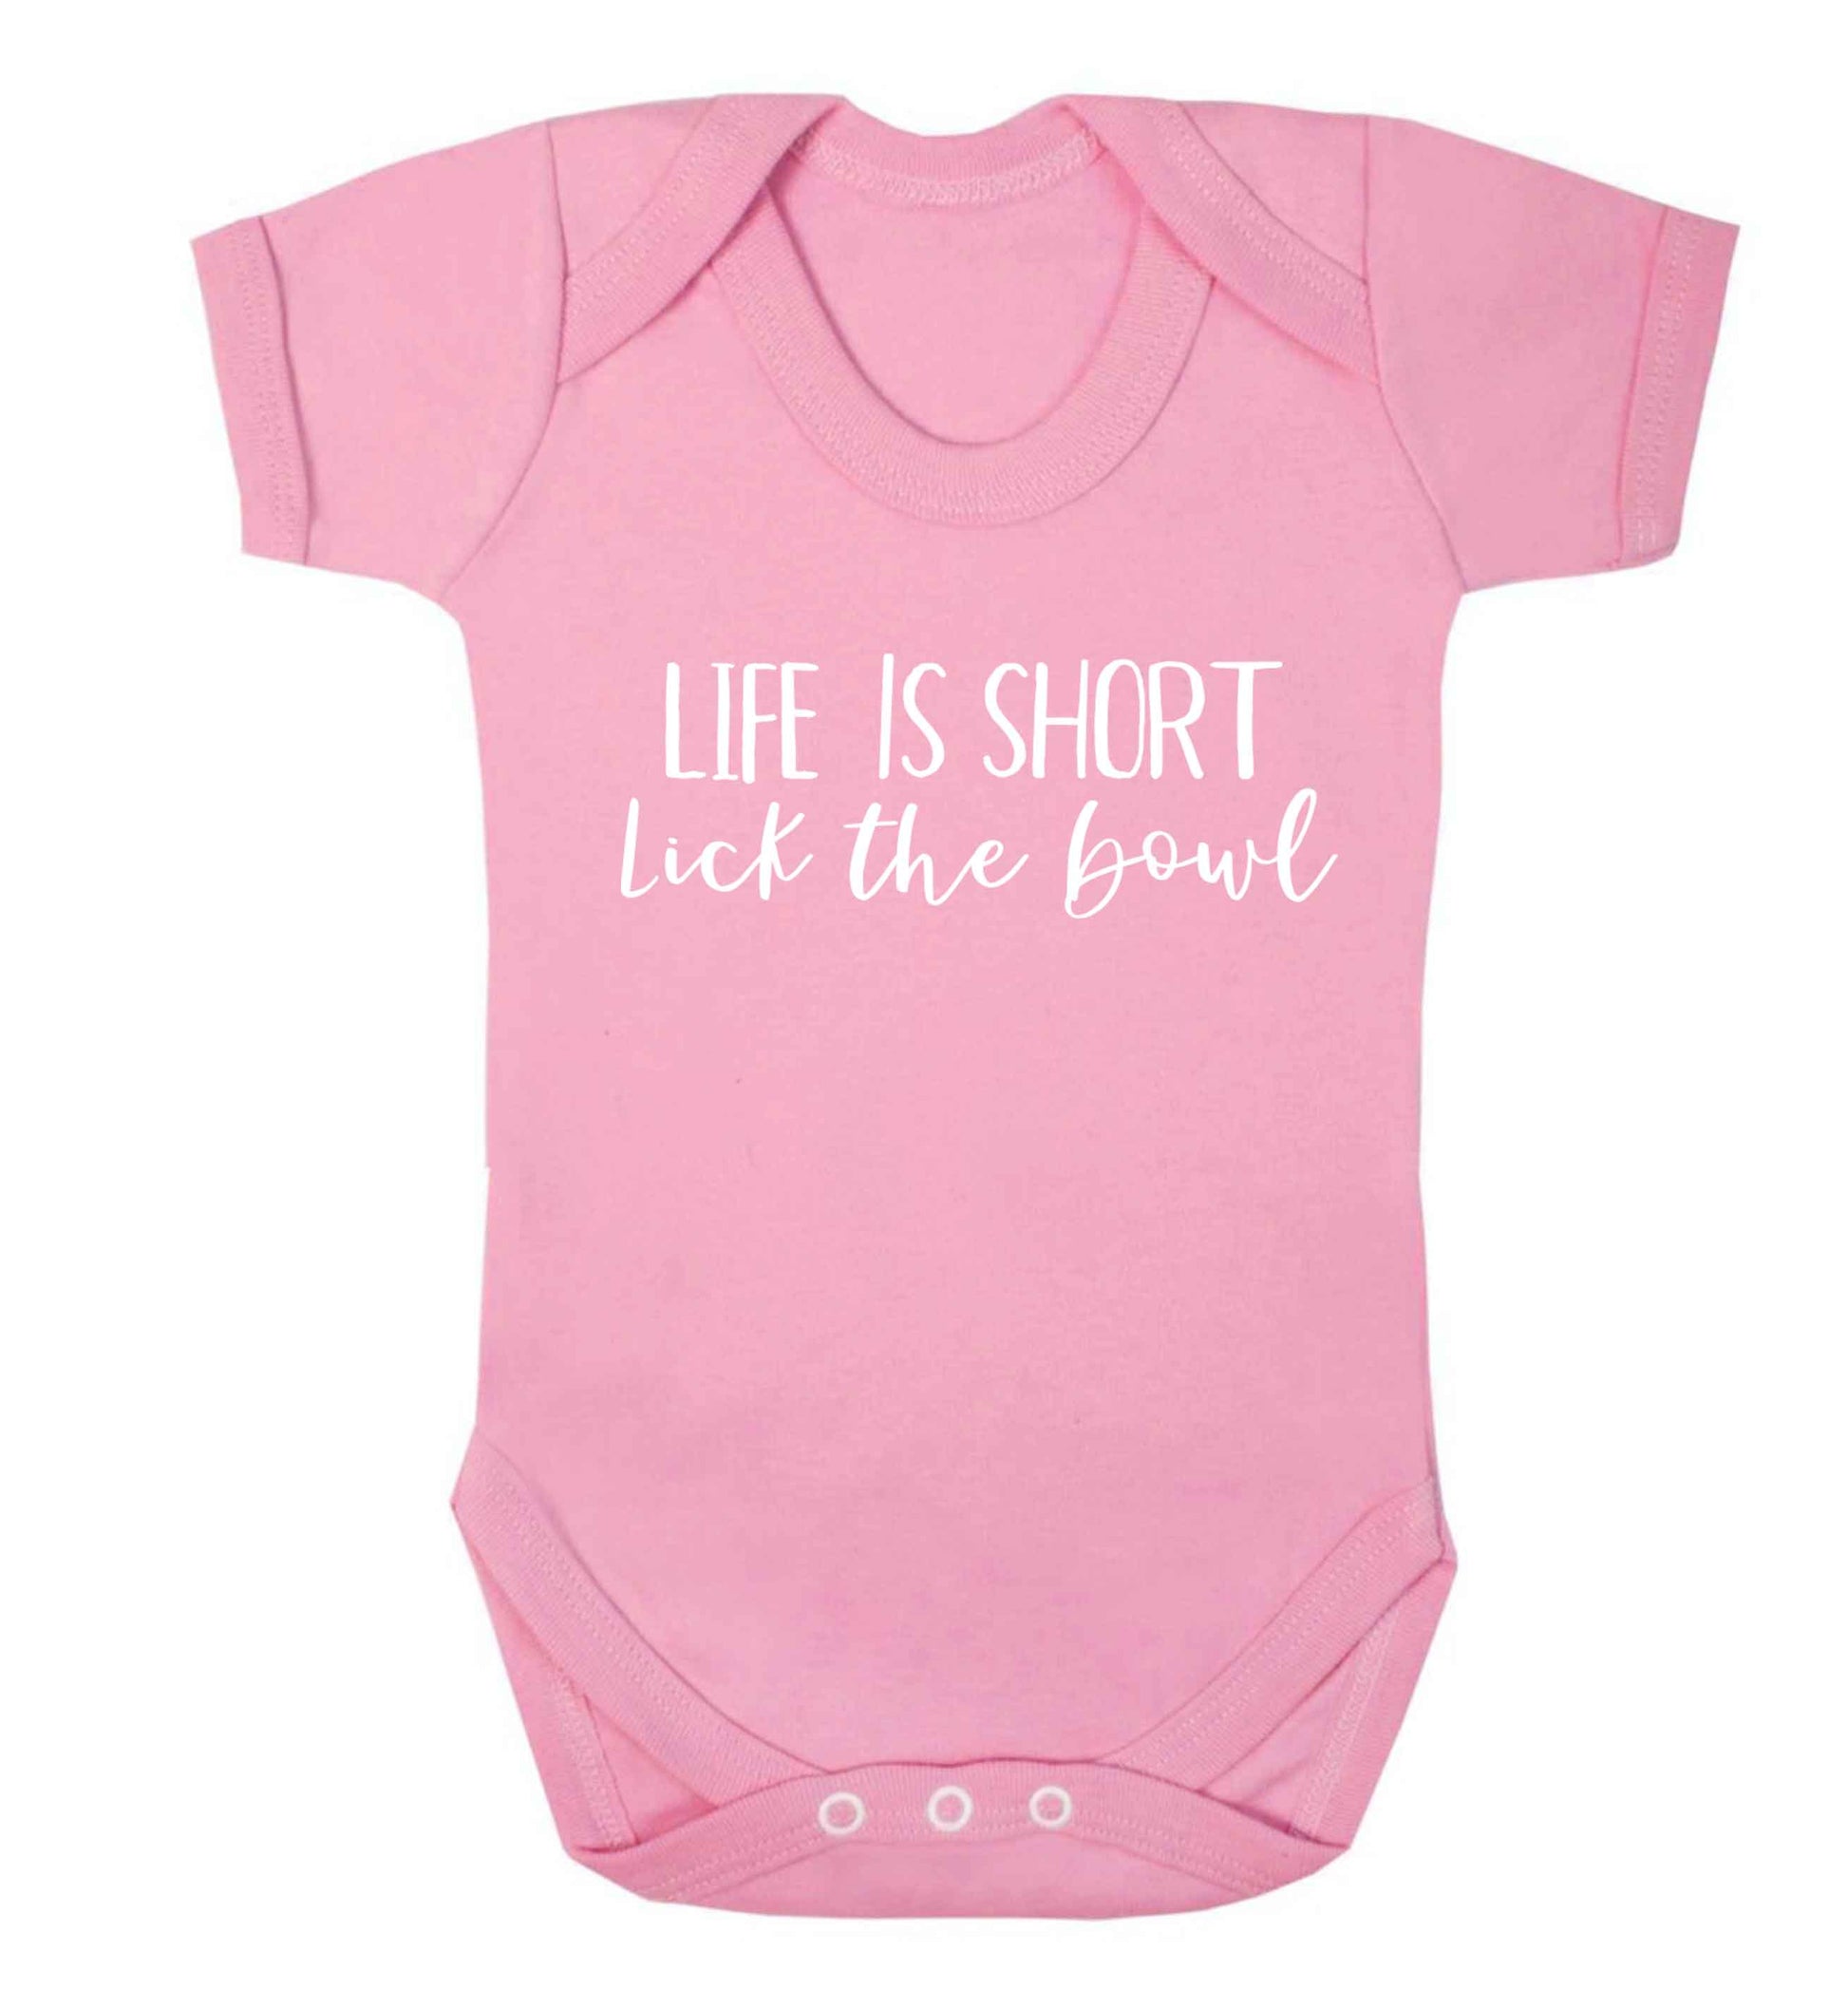 Life is short lick the bowl Baby Vest pale pink 18-24 months